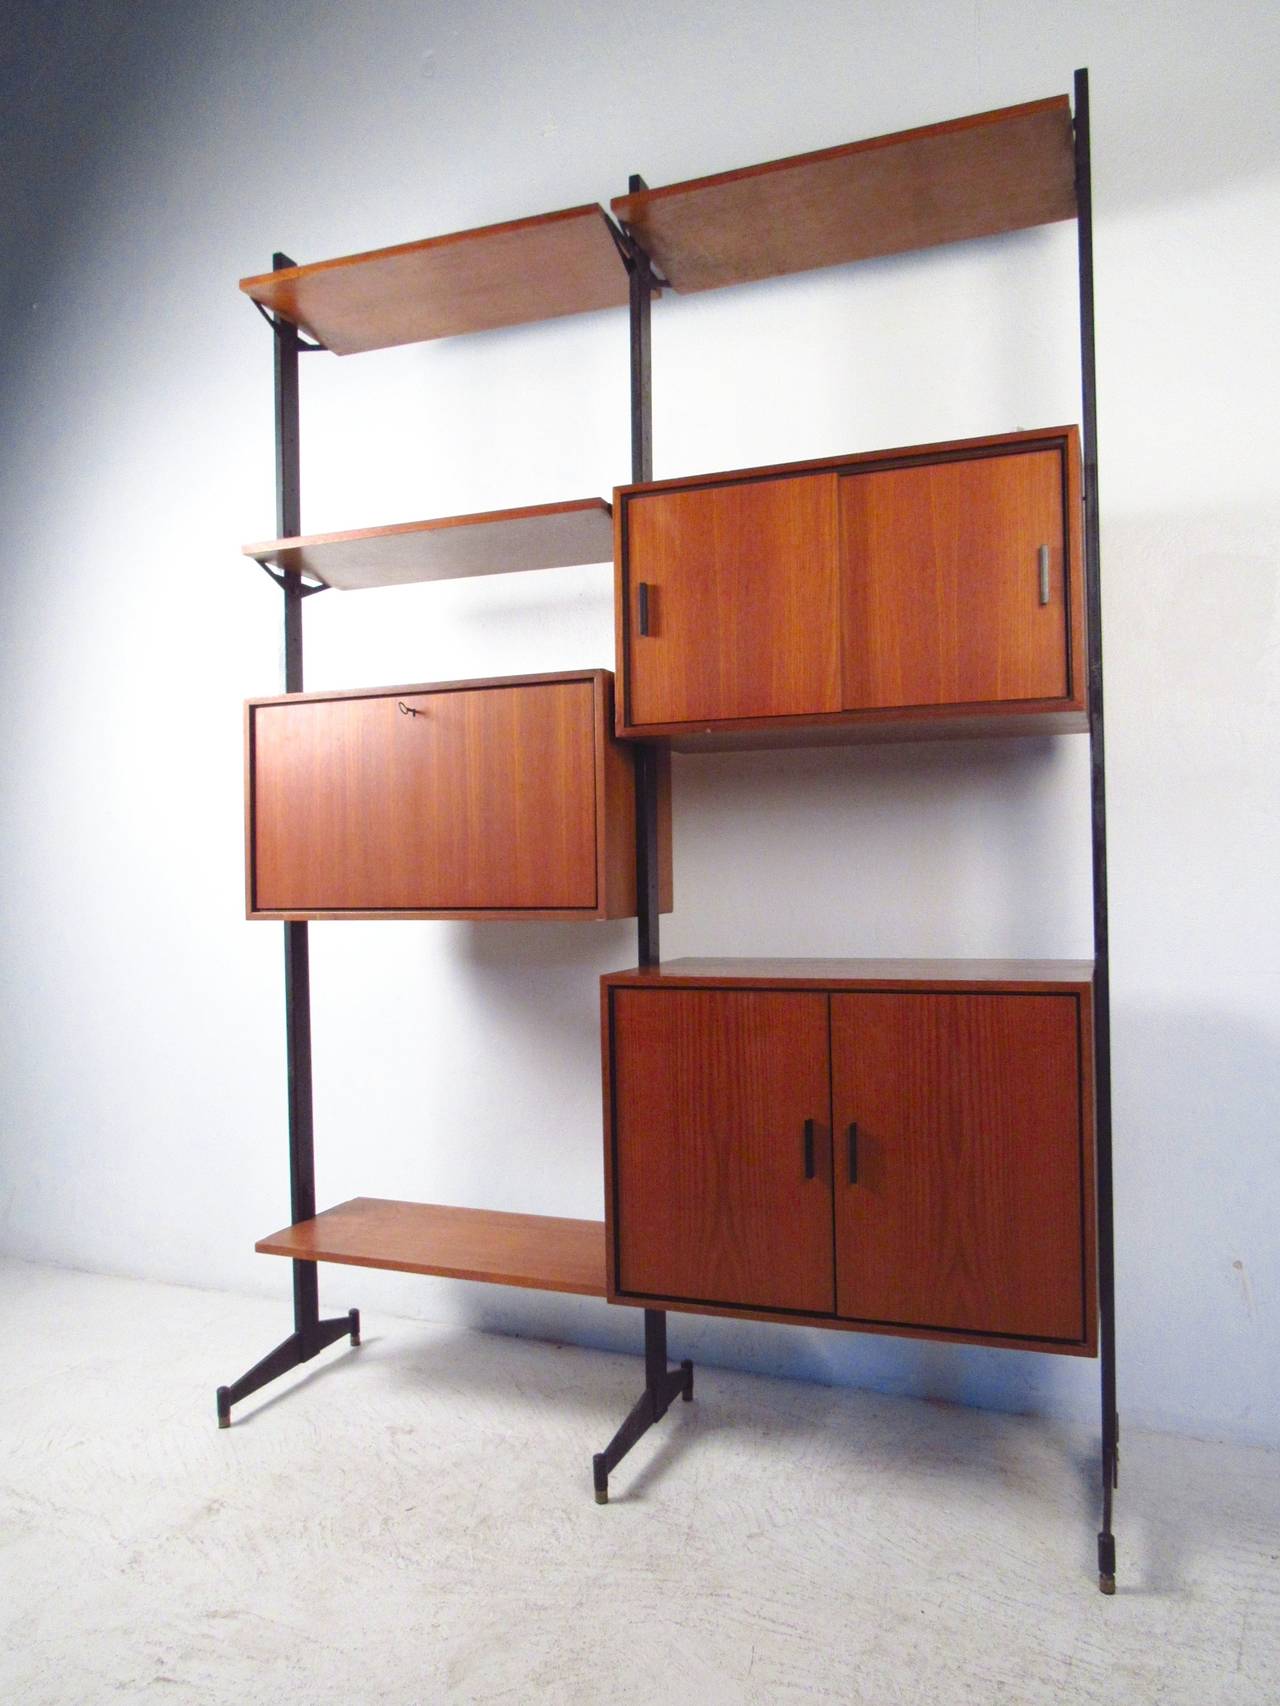 Freestanding modular wall unit with teak shelves and compartments mounted to black metal supports. consists of drop front writing surface, sliding door compartment, and double door storage module. Please confirm item location (NY or NJ) with dealer.